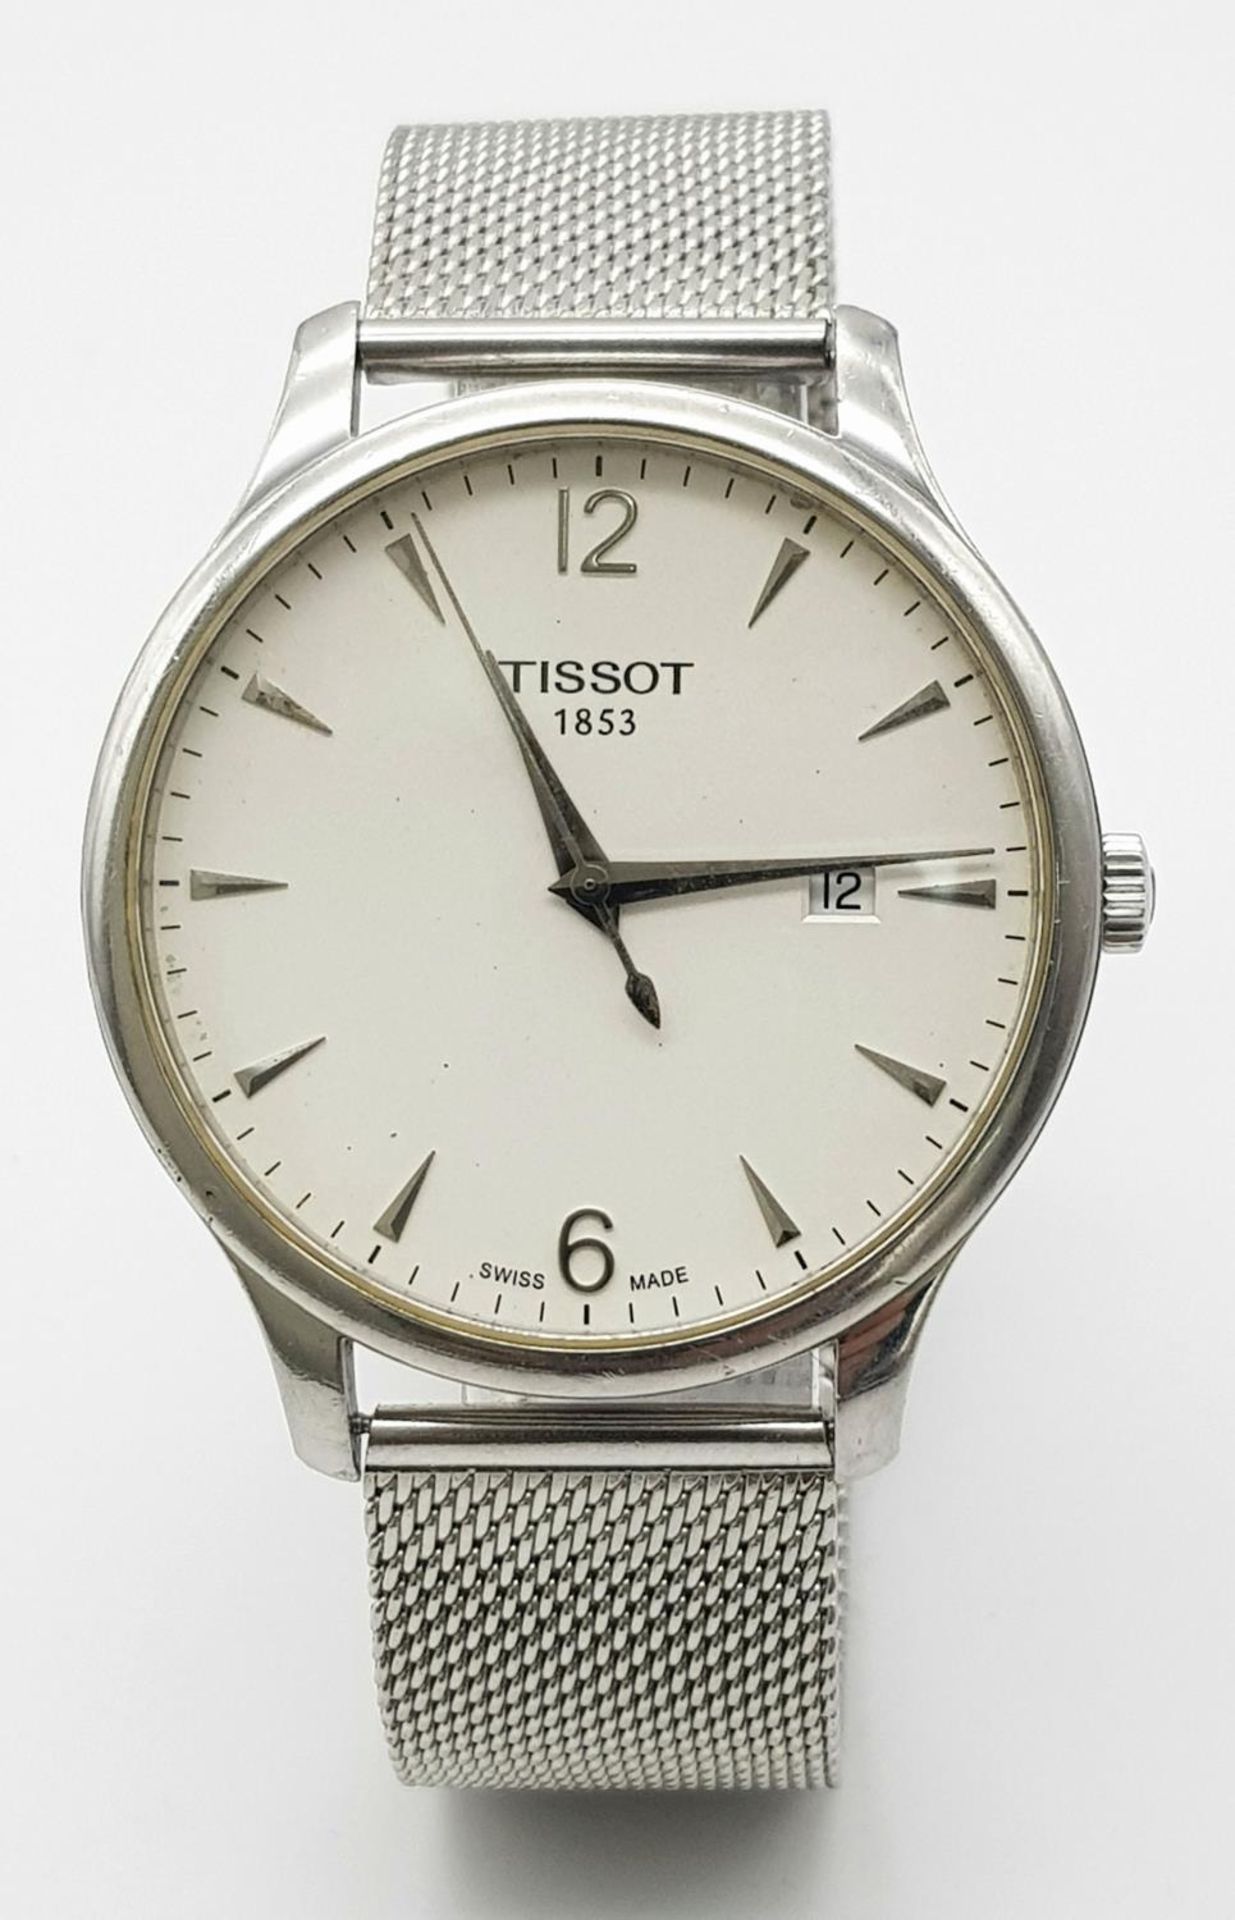 A Large Tissot Quartz Gents Watch. Stainless steel bracelet and case - 42mm. White dial with date - Bild 2 aus 6